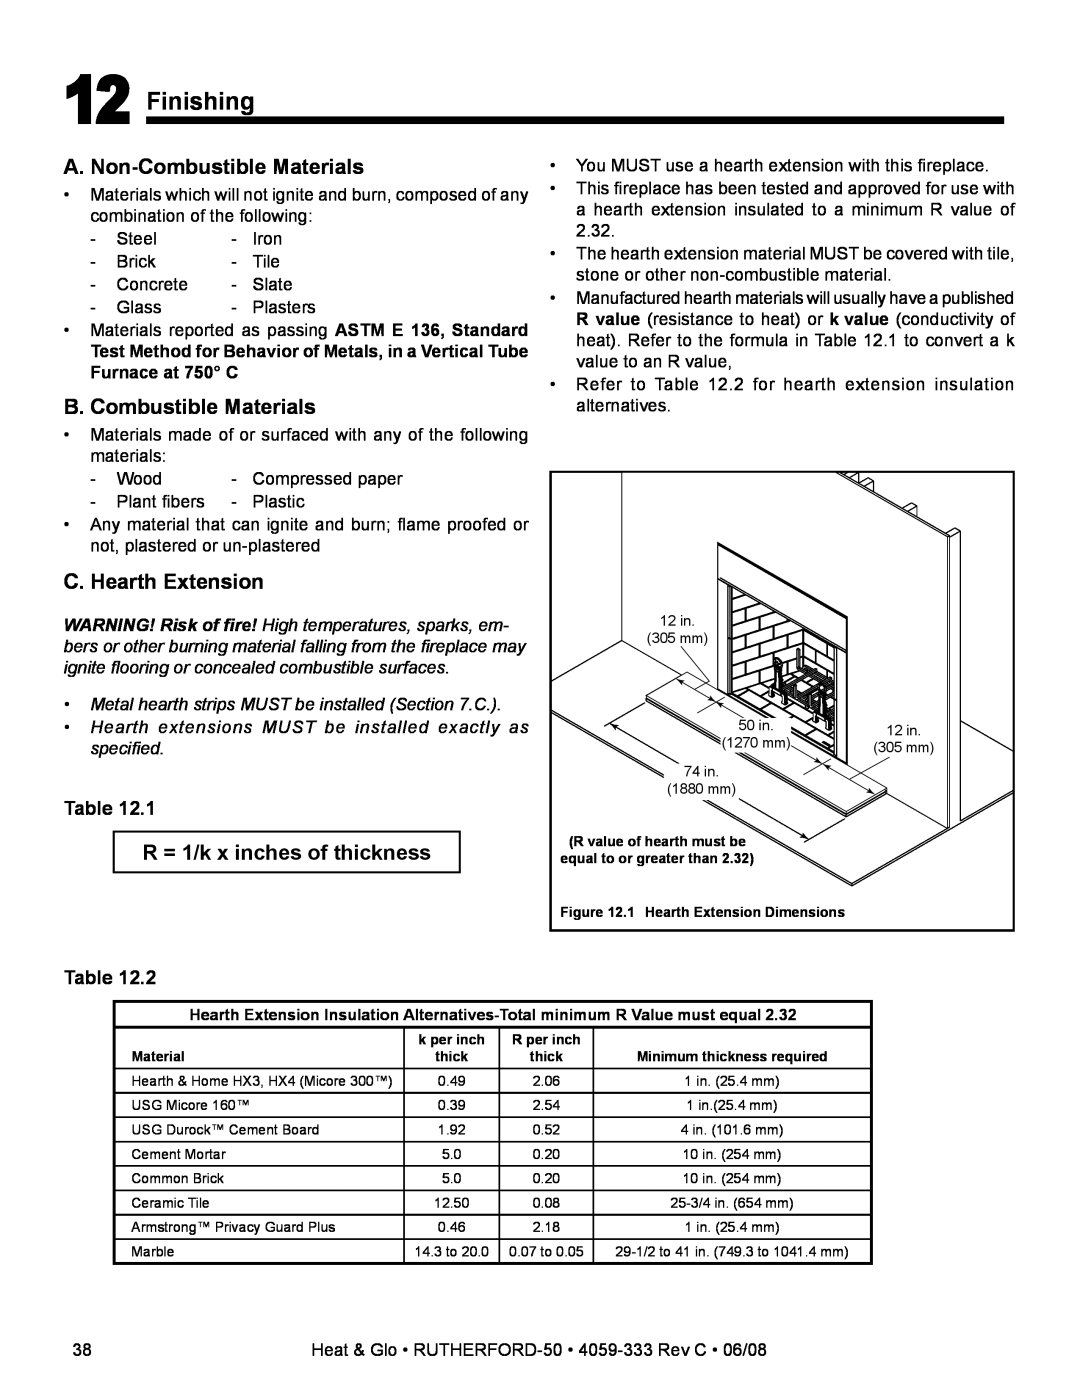 Heat & Glo LifeStyle 50 owner manual Finishing, A. Non-CombustibleMaterials, B. Combustible Materials, C. Hearth Extension 